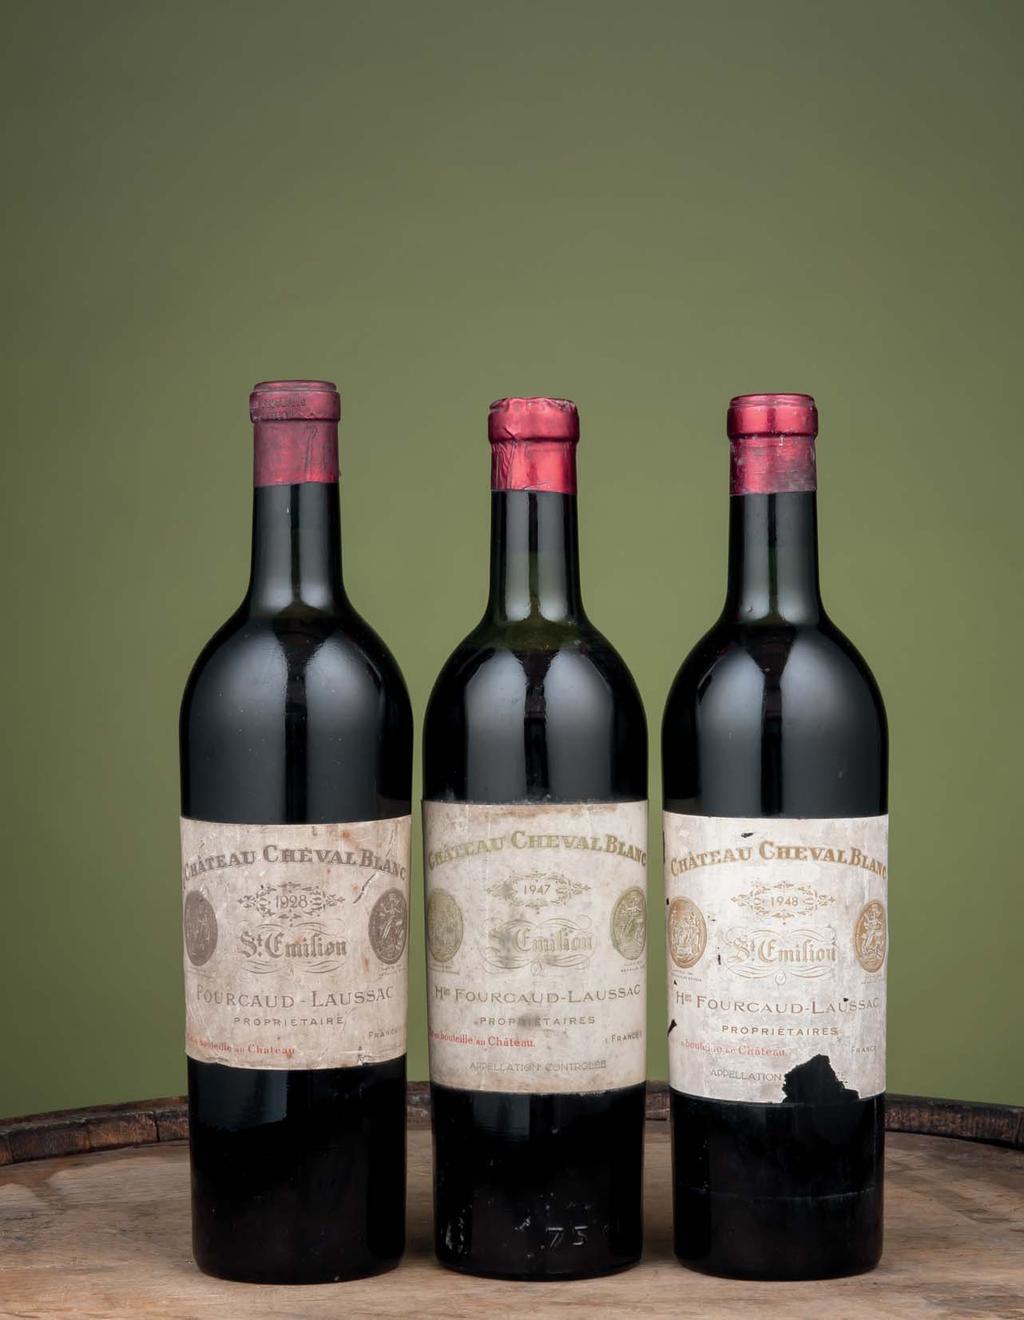 FRIDAY, OCTOBER 30, 2015 A CELEBRATION OF BORDEAUX Including Wines Directly From: CHATEAU LEOVILLE LAS CASES CHATEAU MOUTON ROTHSCHILD